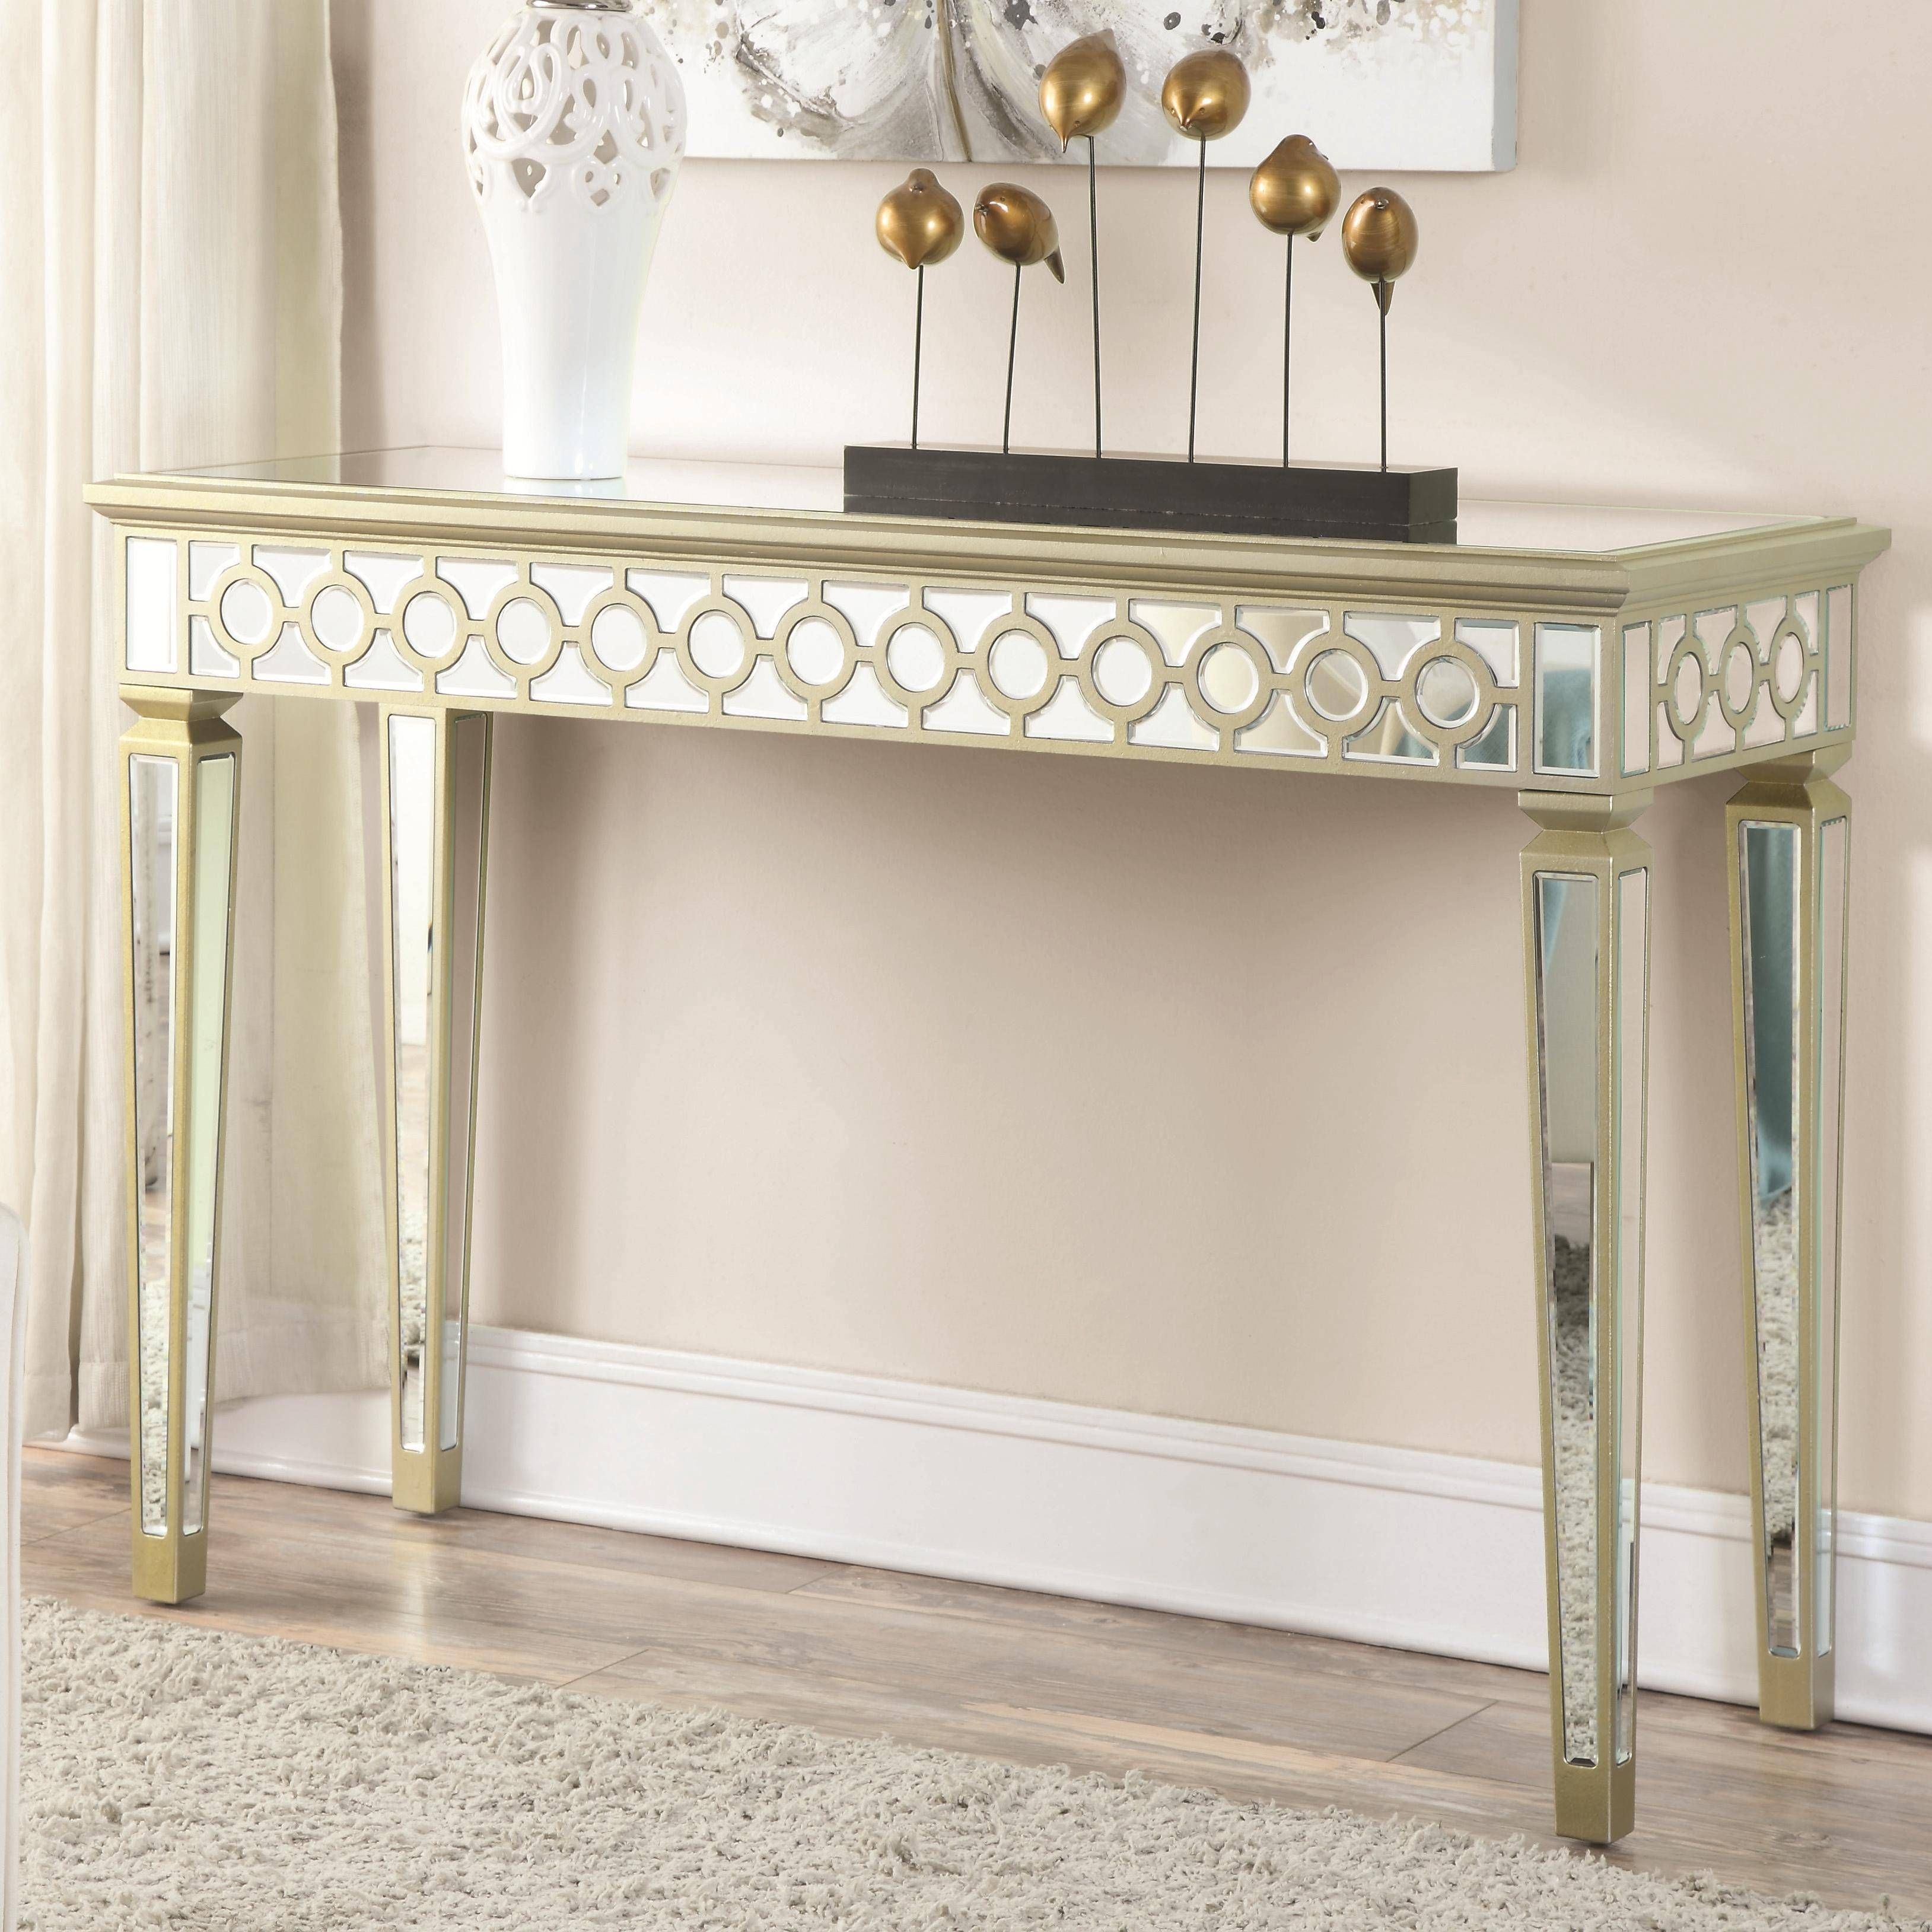 Antique Mirrored Entry Table | Decorative Table Decoration Intended For Vintage Mirror Coffee Tables (View 29 of 30)